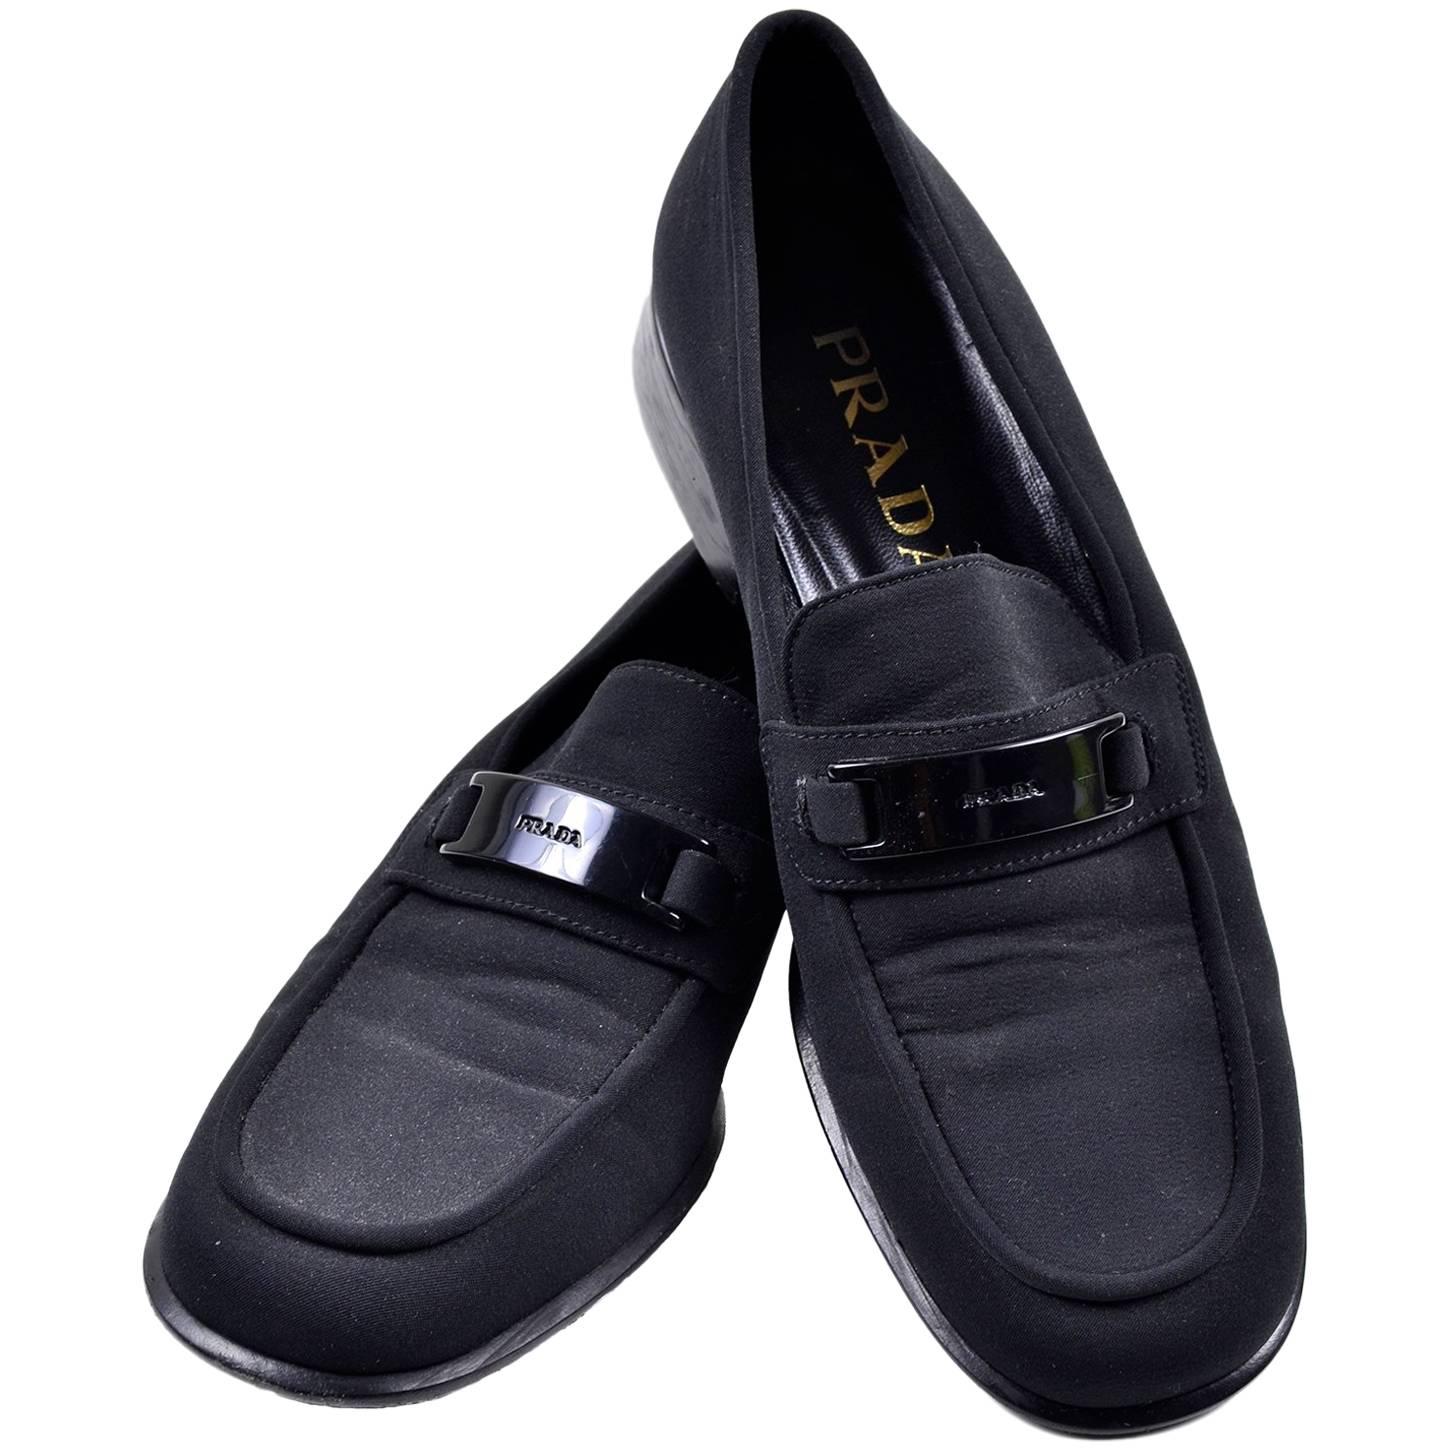 Prada Vintage 1990s Shoes Black Fabric Loafers Size 38 For Sale at 1stDibs  | prada vintage loafers, prada loafers vintage, vintage prada loafers